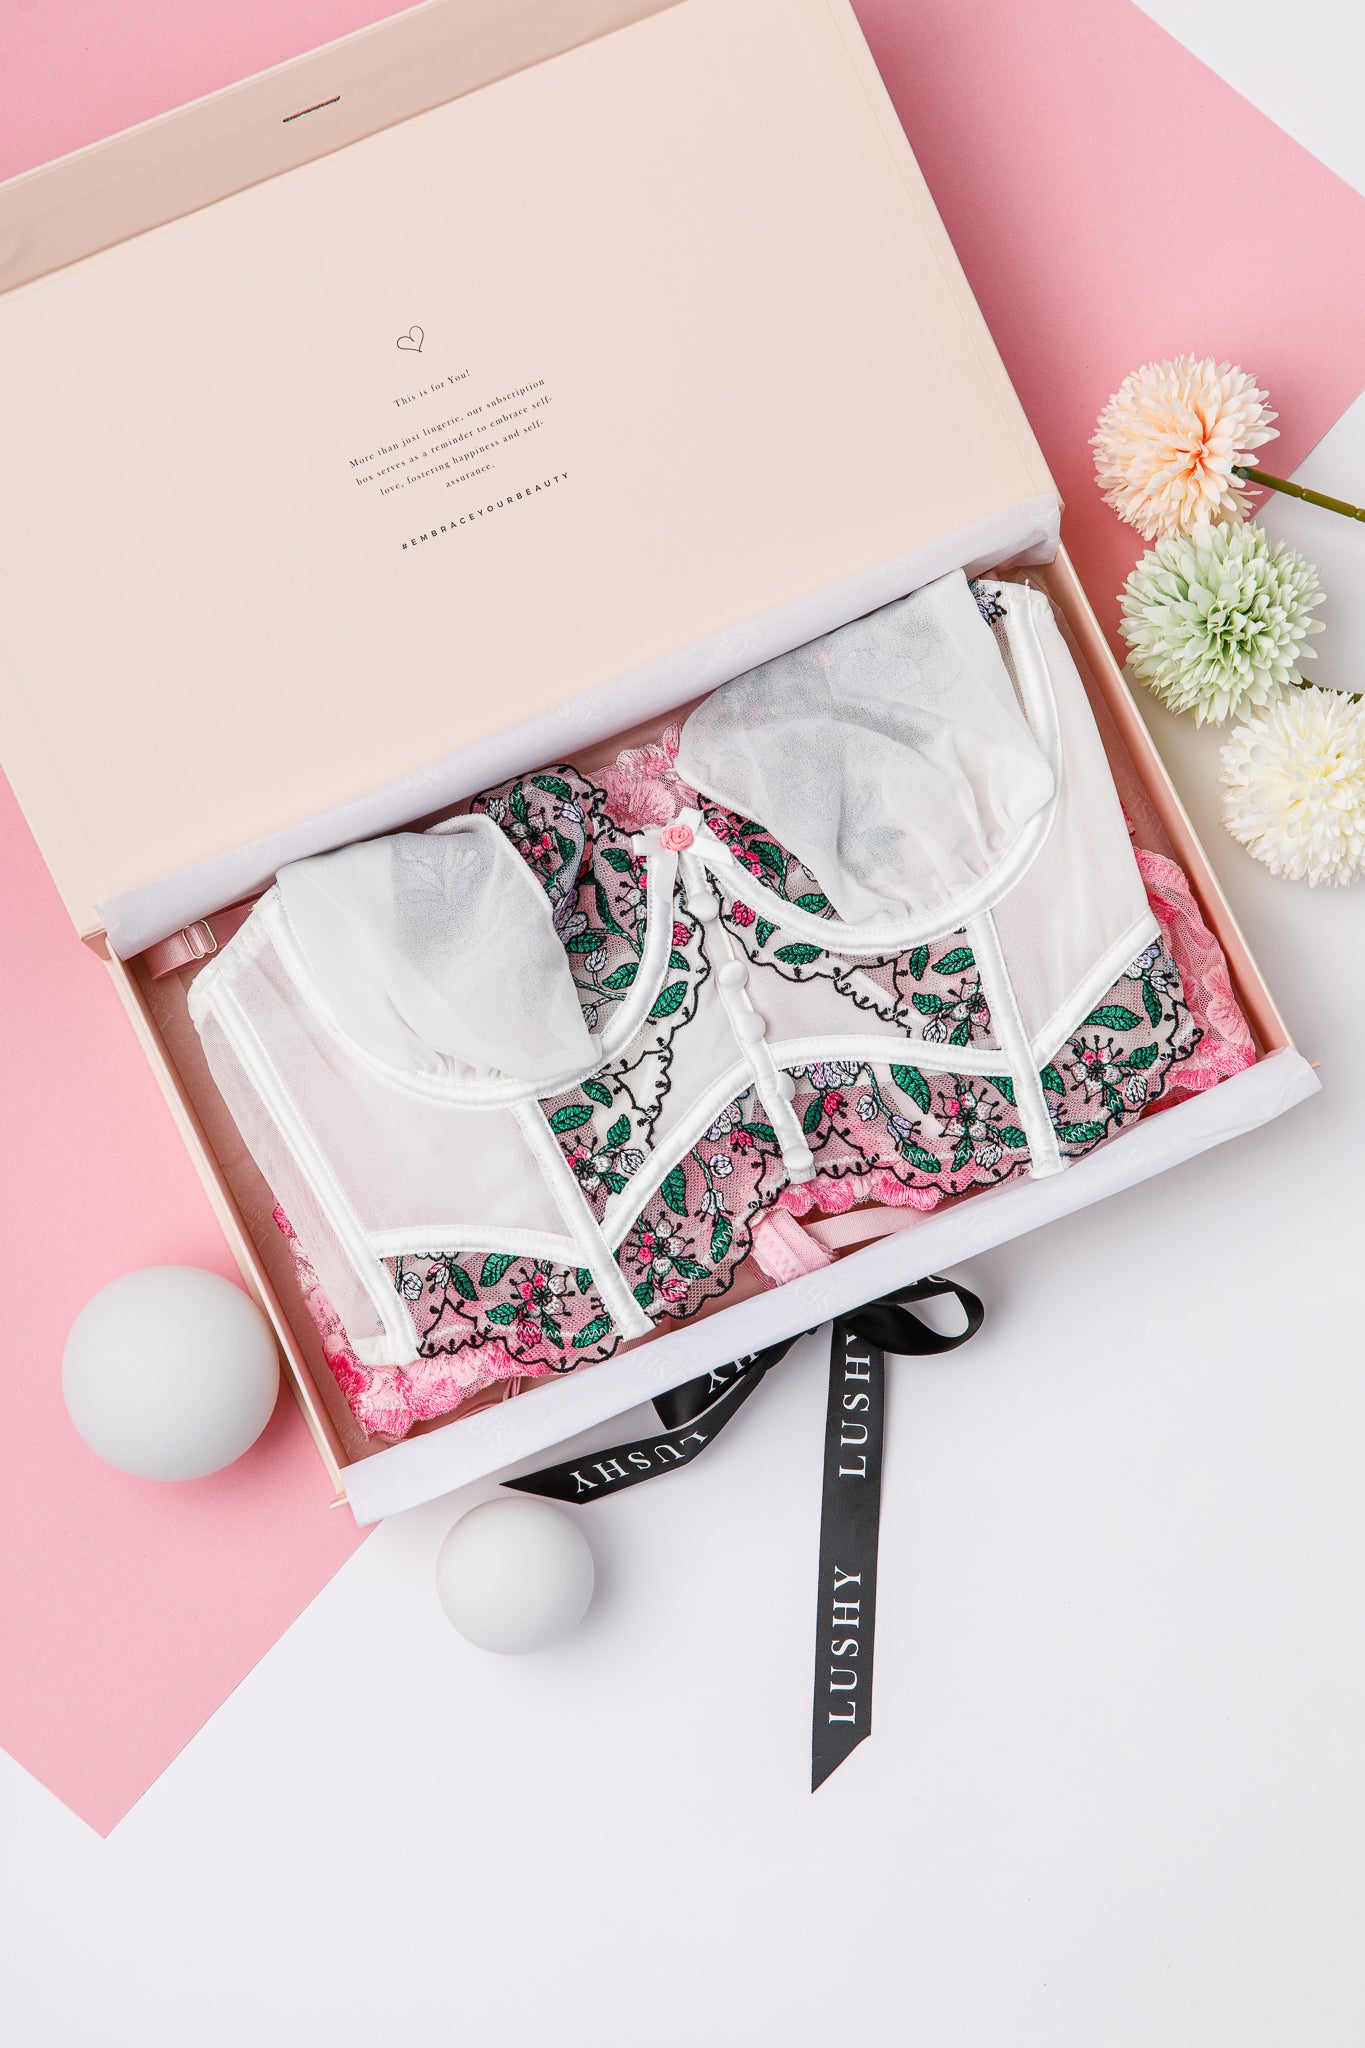 EBY Intimates Subscription Box Review - February 2018